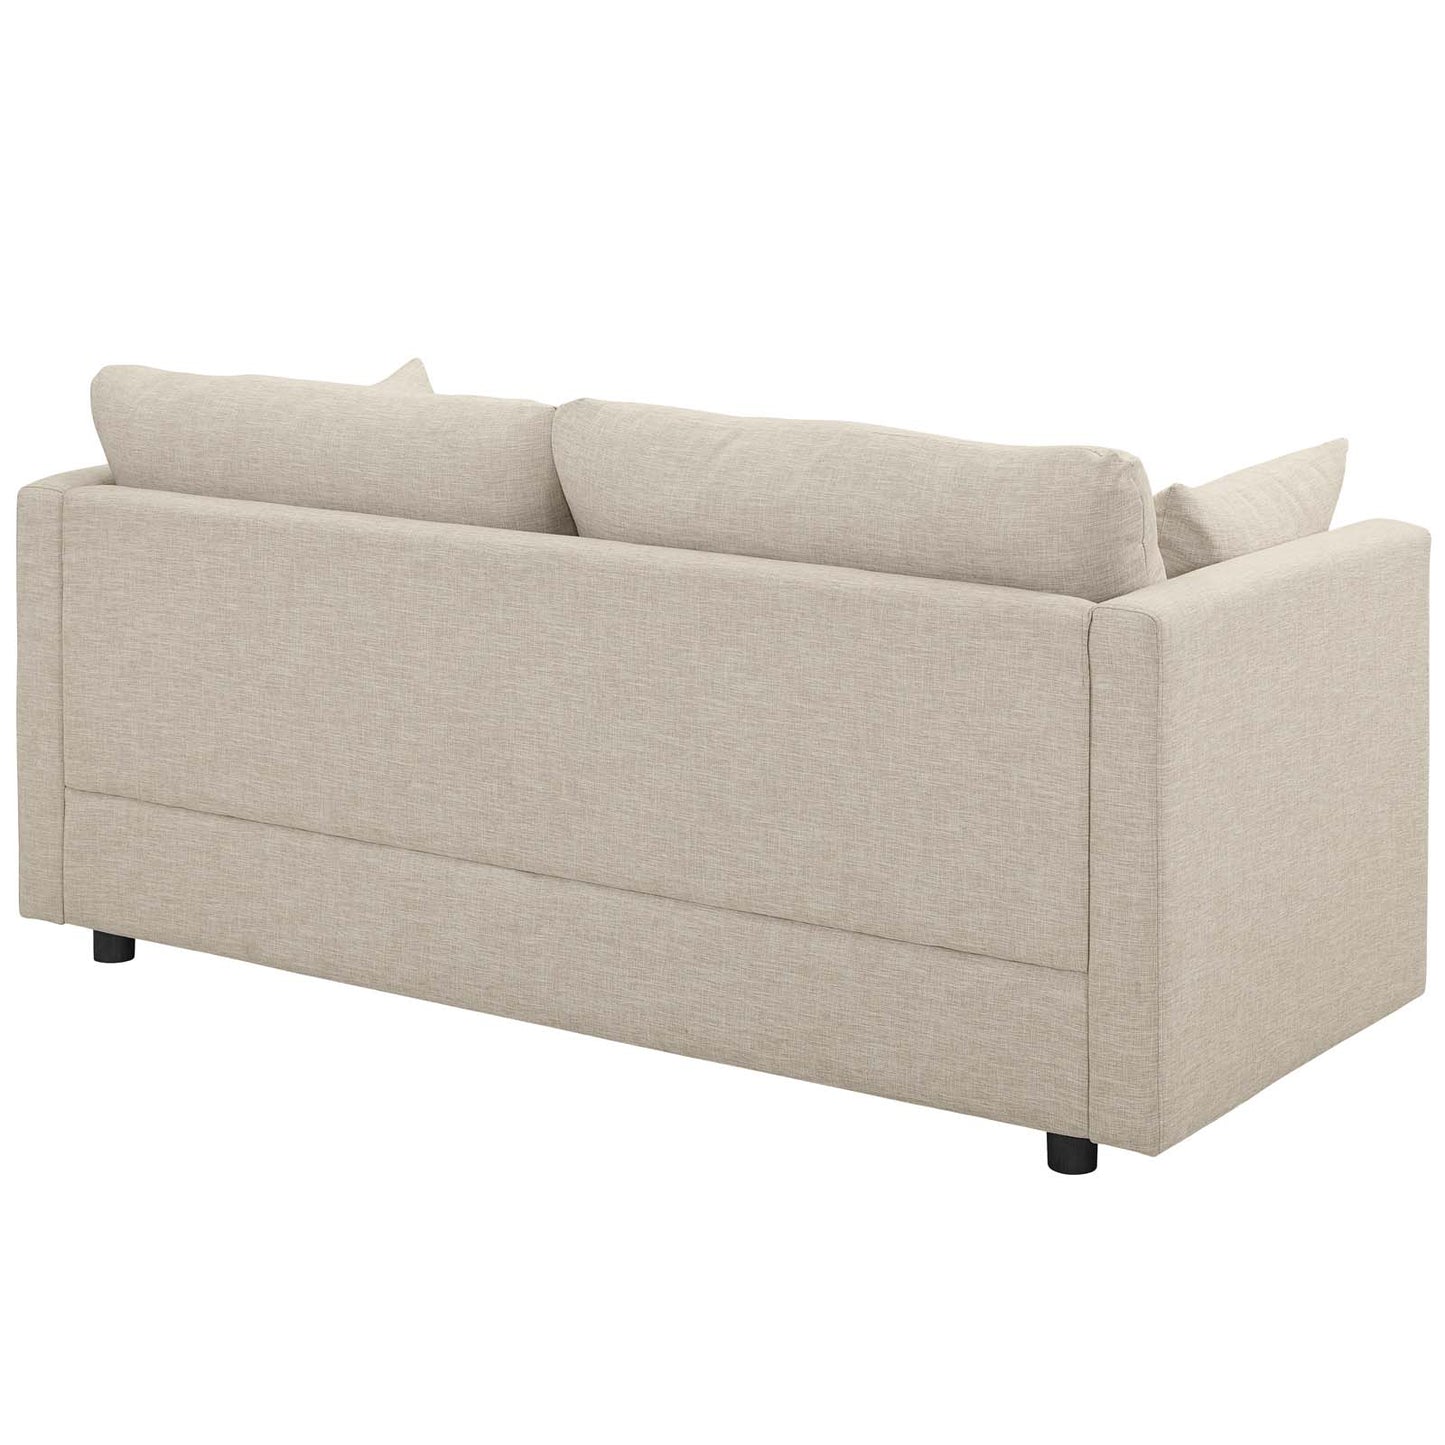 Activate Upholstered Fabric Sofa and Armchair Set Beige EEI-4045-BEI-SET